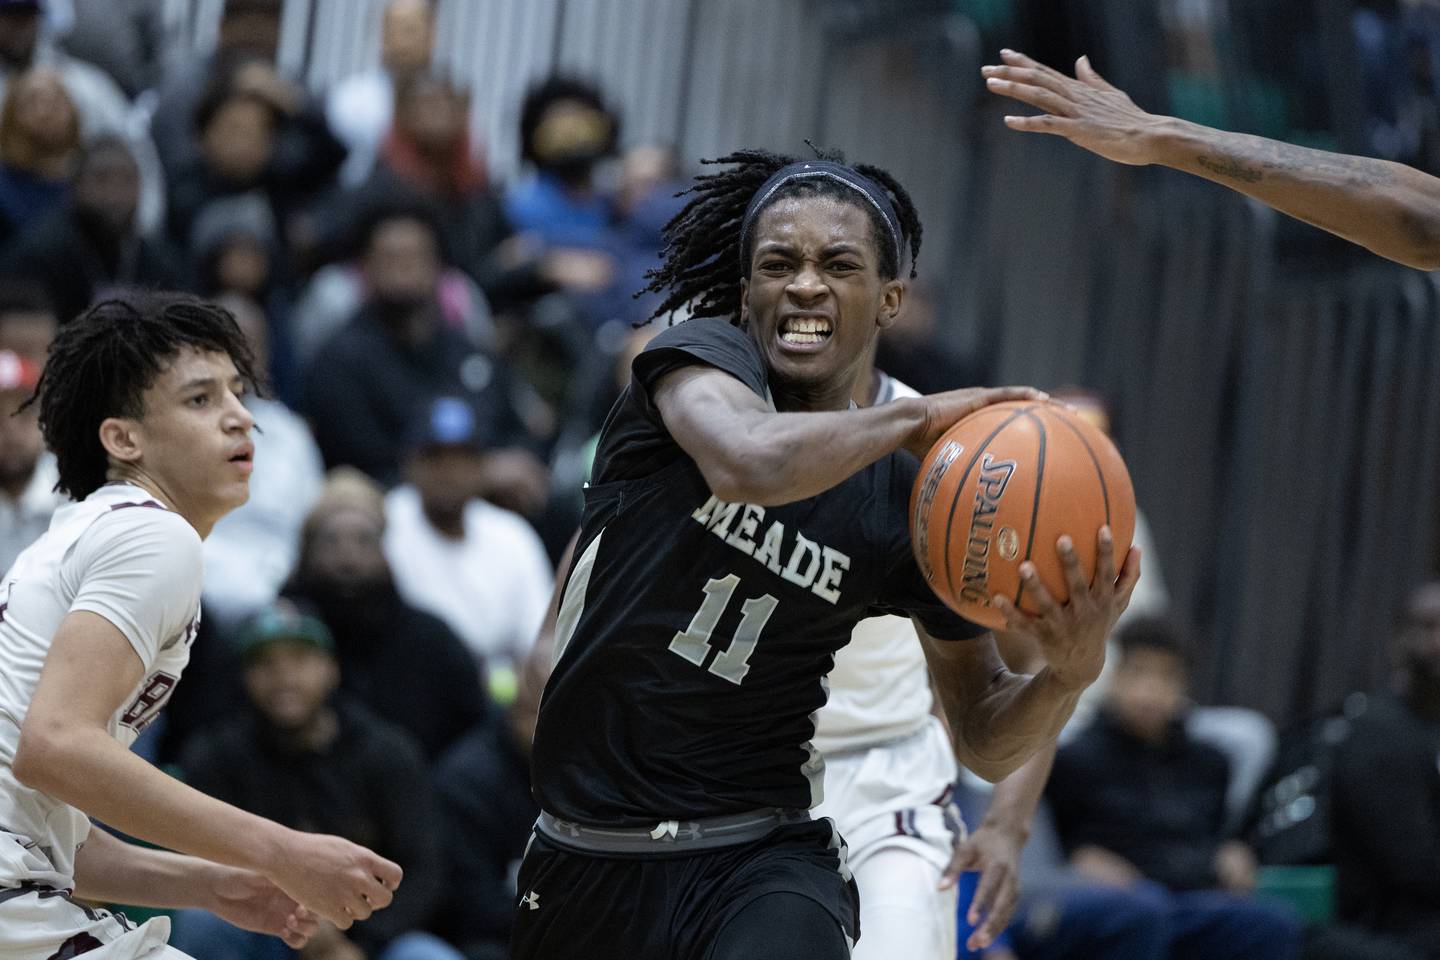 Meade’s Xavion Roberson (11) drives the ball down court during the Anne Arundel County Boys Basketball Championship game in Odenton, Md., on Saturday, February 18, 2023.  Meade defeated Broadneck 60-51 in regulation time to win the championship.